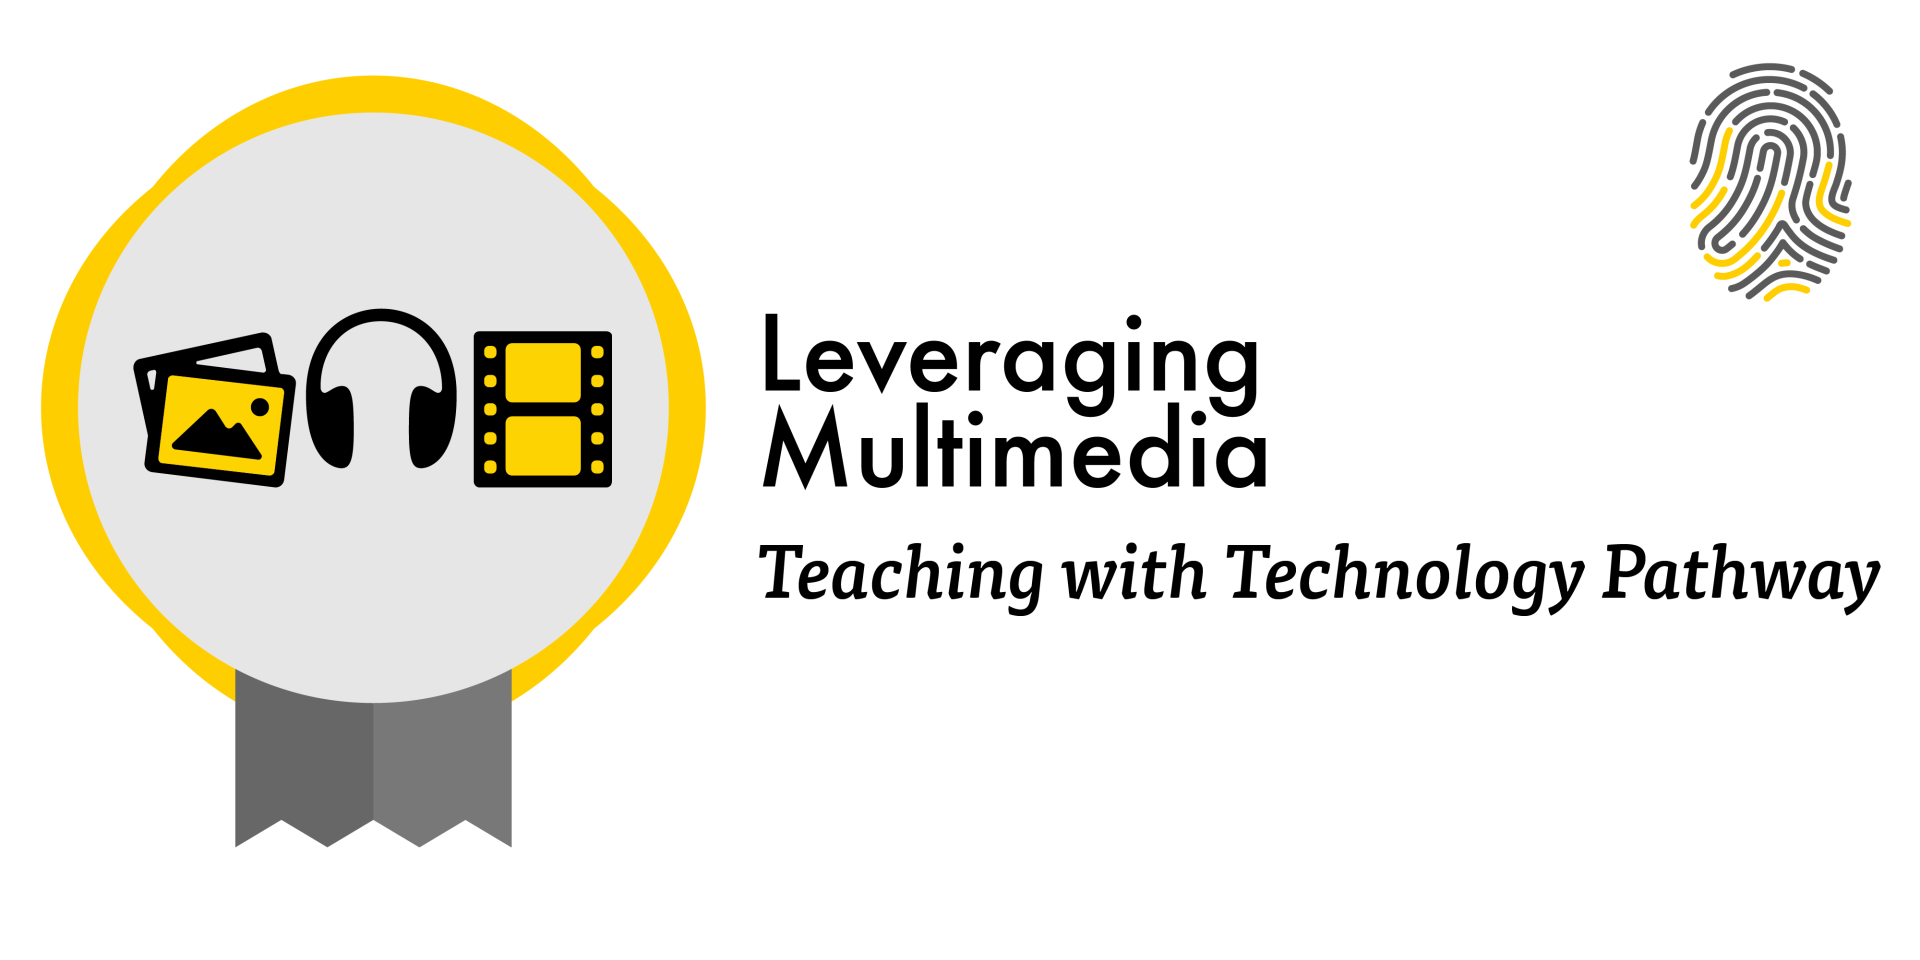 Leveraging Multimedia, Teaching with Technology Pathway